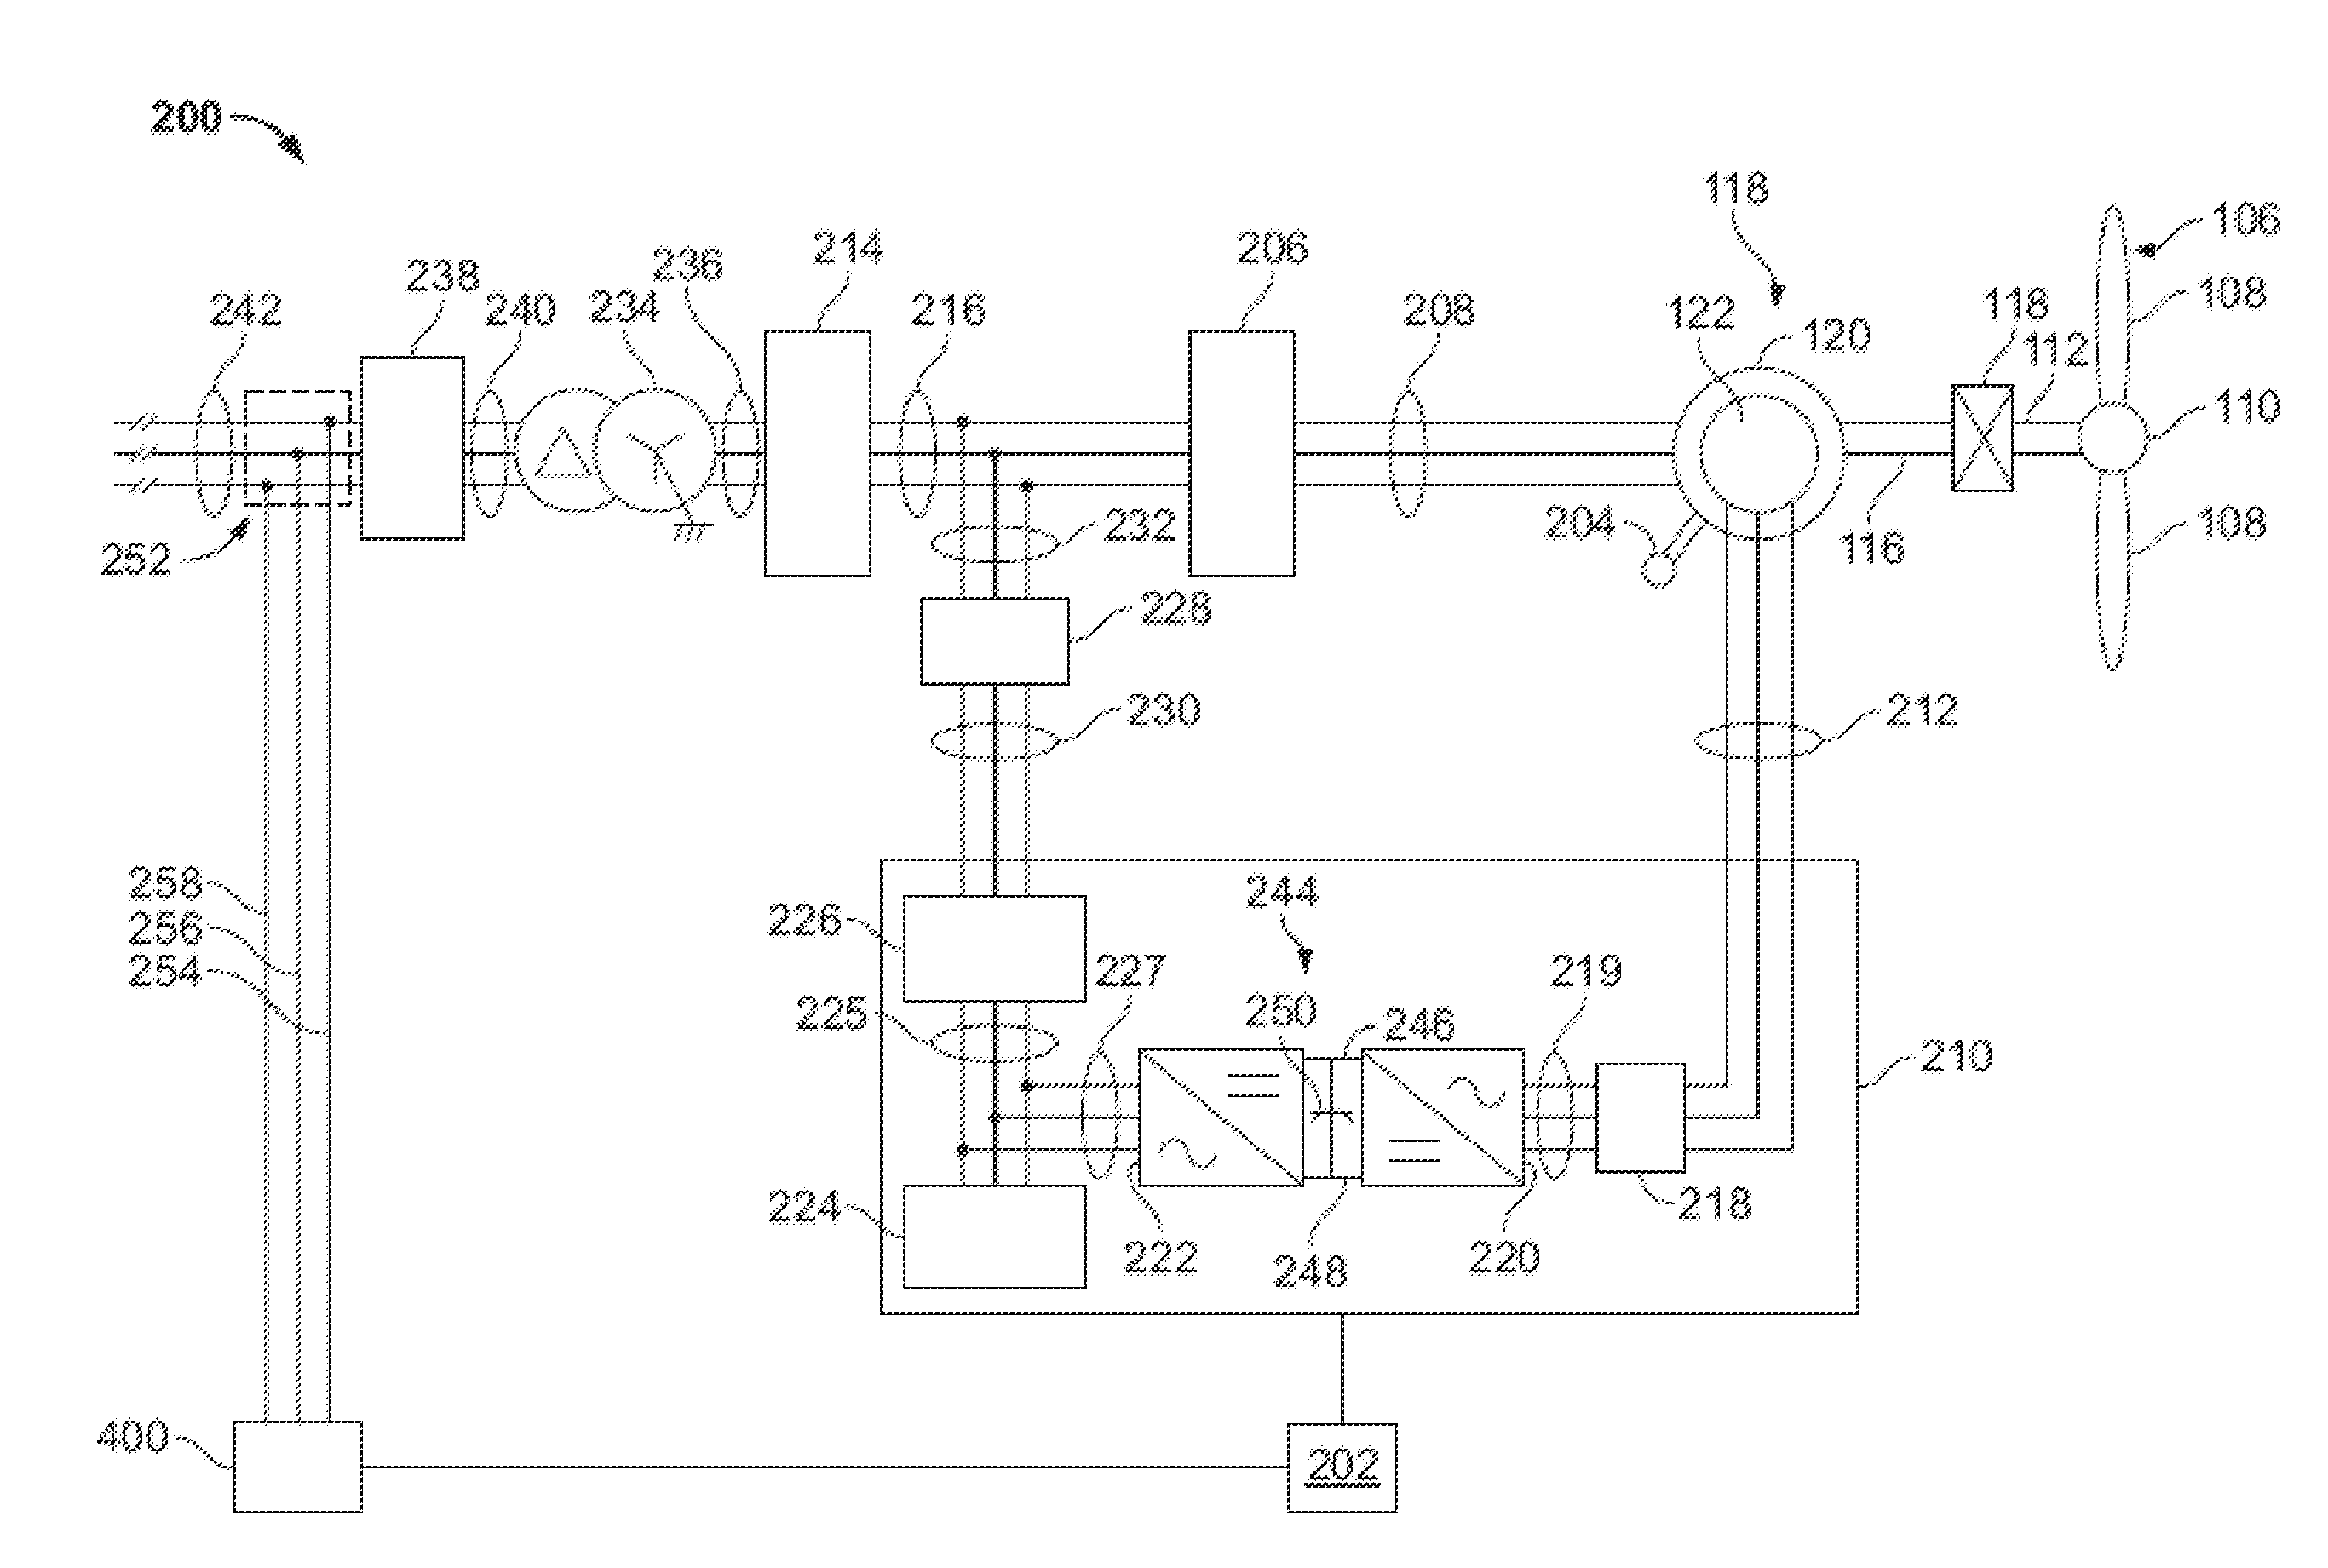 System and method for controlling a dual-fed induction generator in response to high-voltage grid events